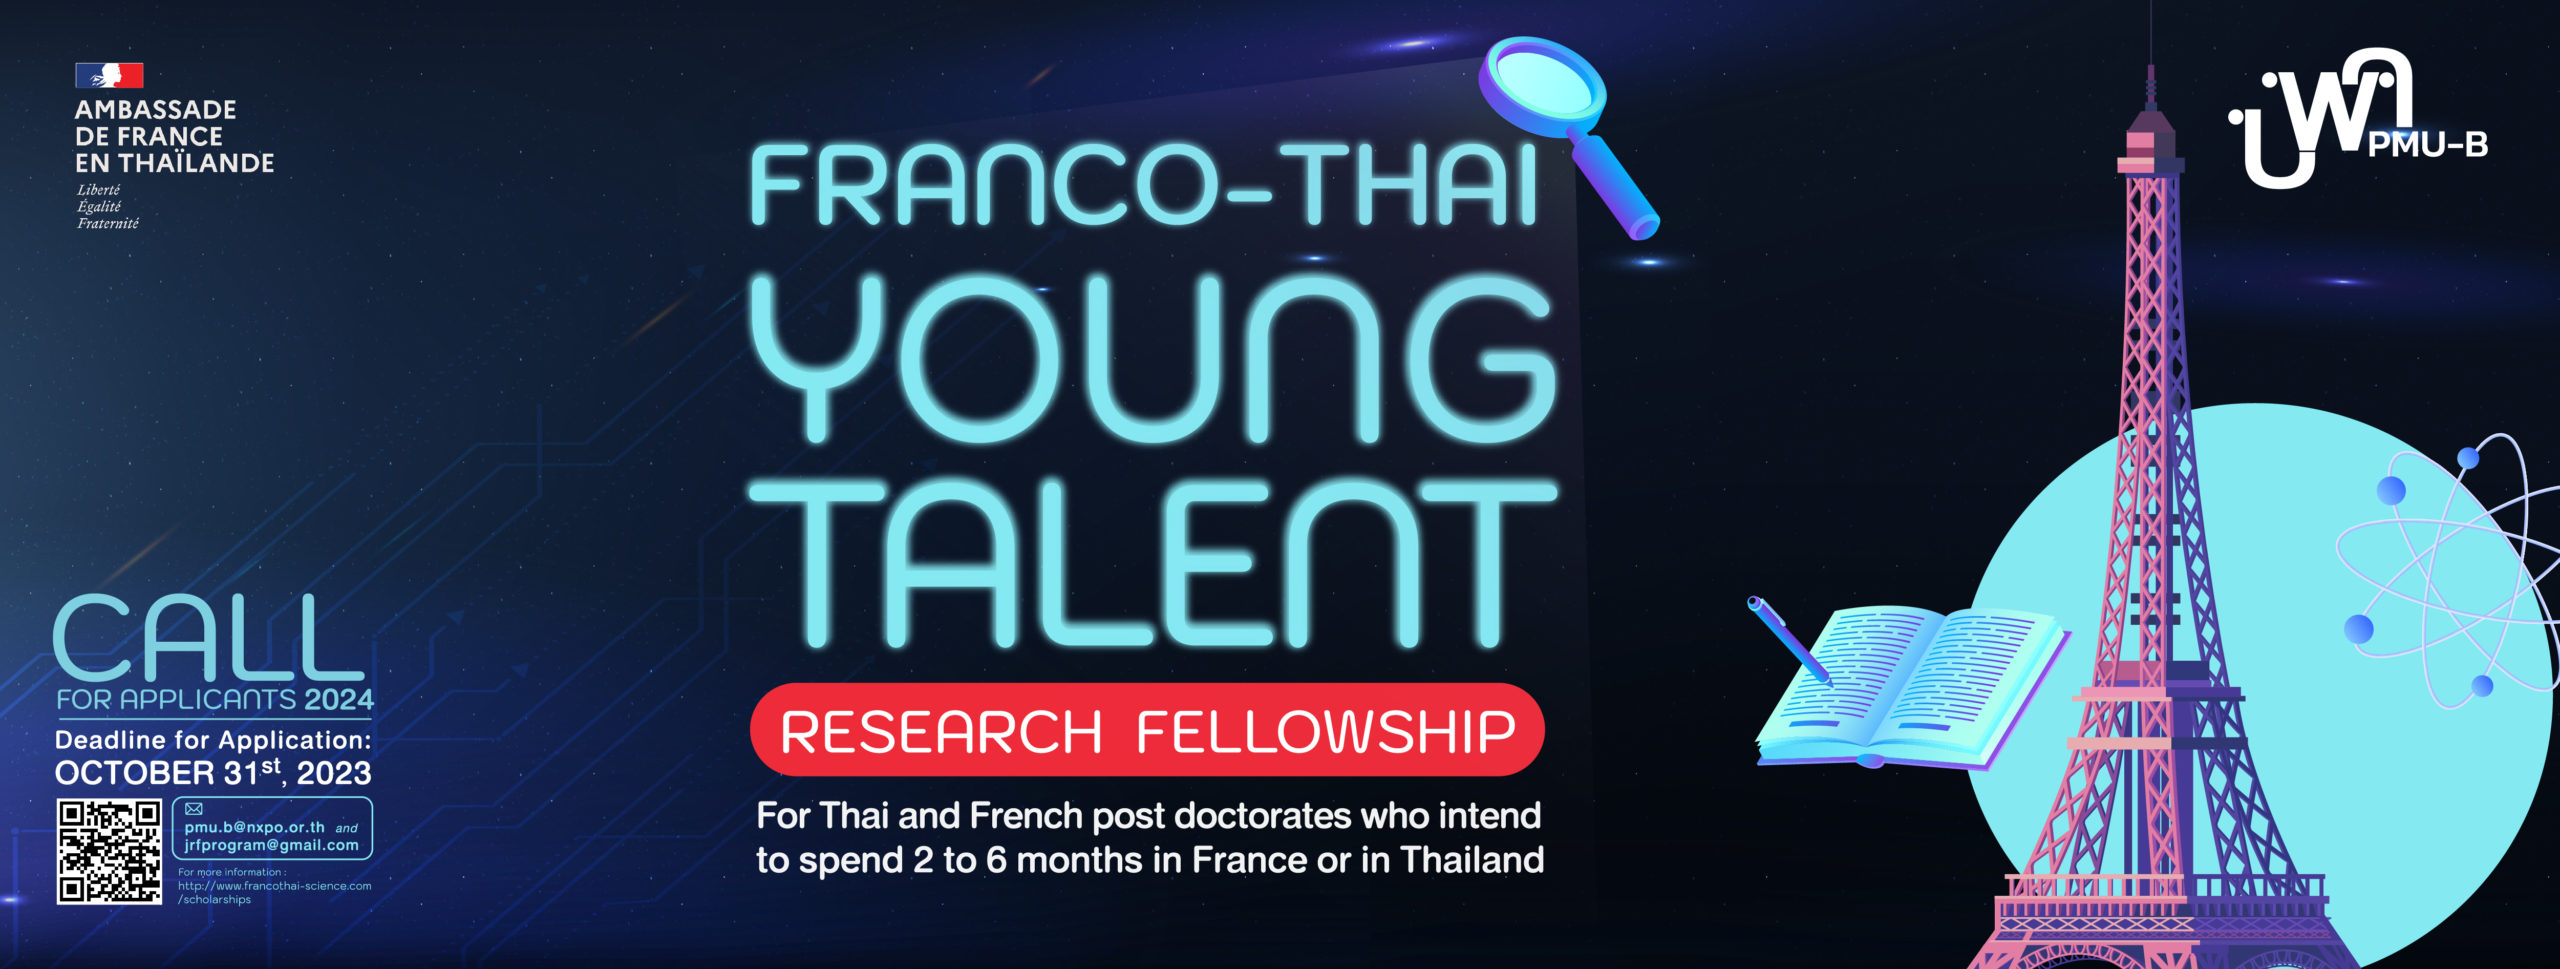 Franco-Thai Young Talent Research Fellowship Program call for Applicant 2024